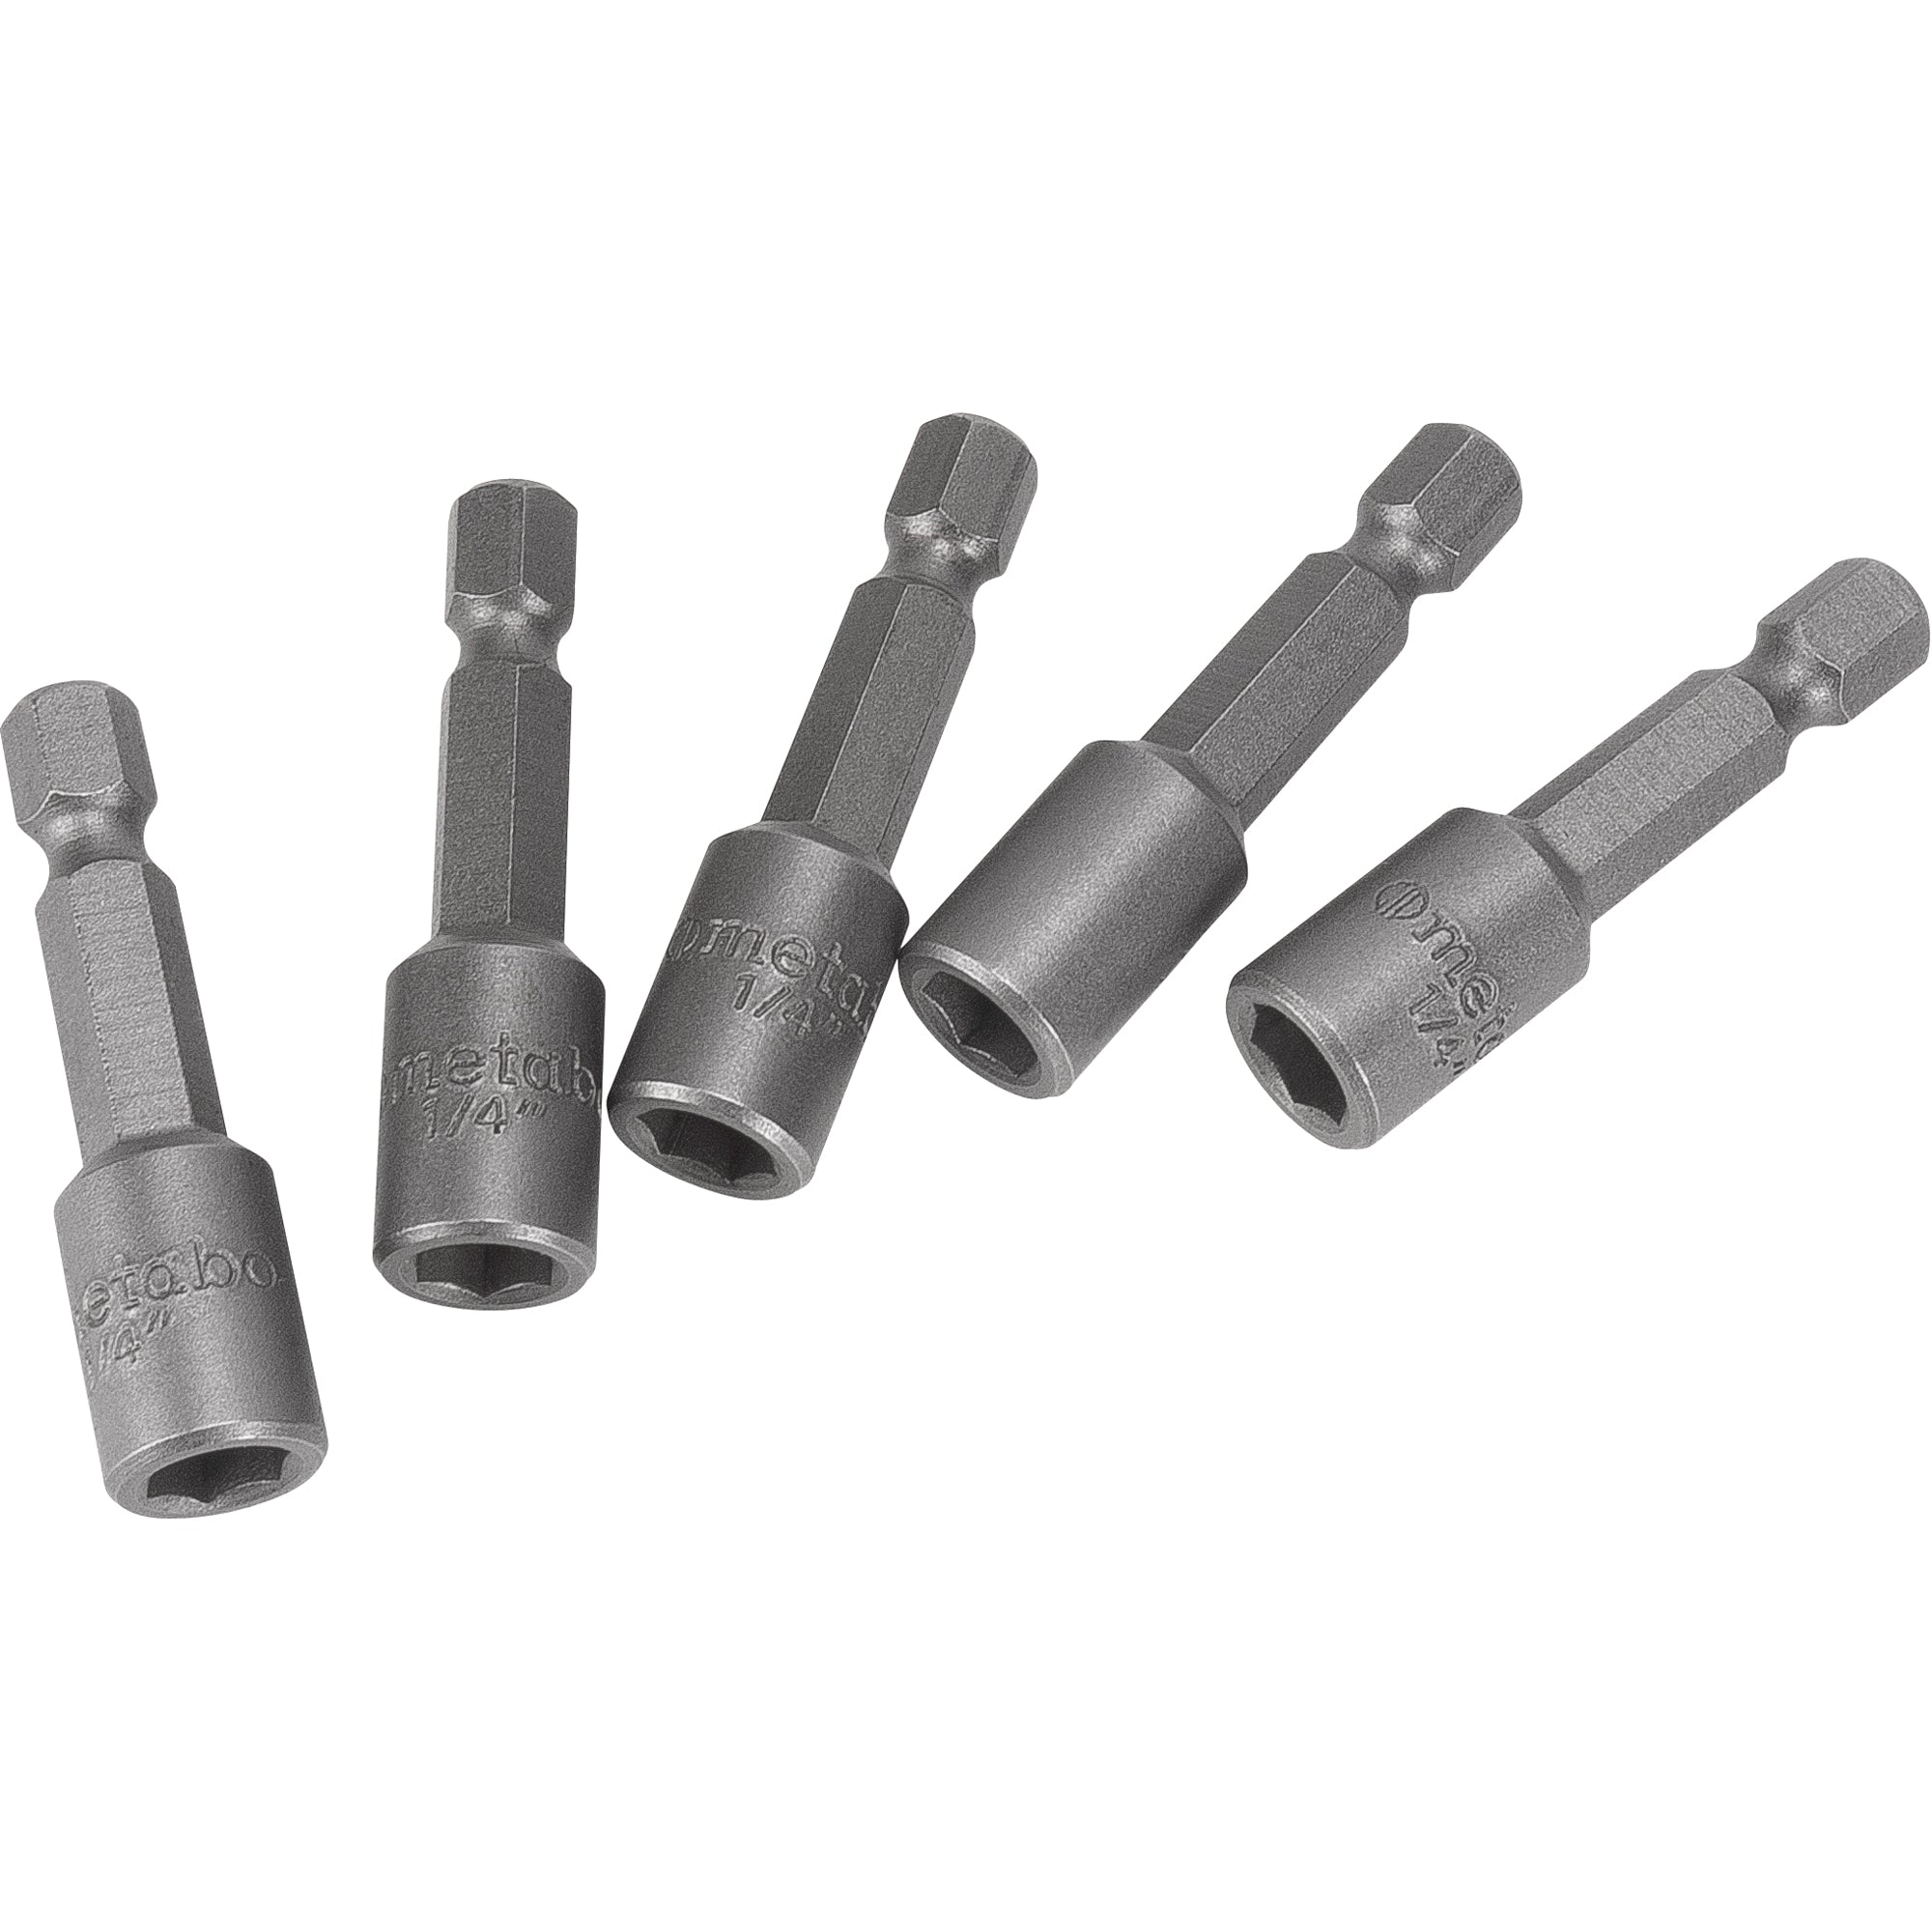 1/4X1-5/8 MAG NUTSETTER-(Pack of 5)